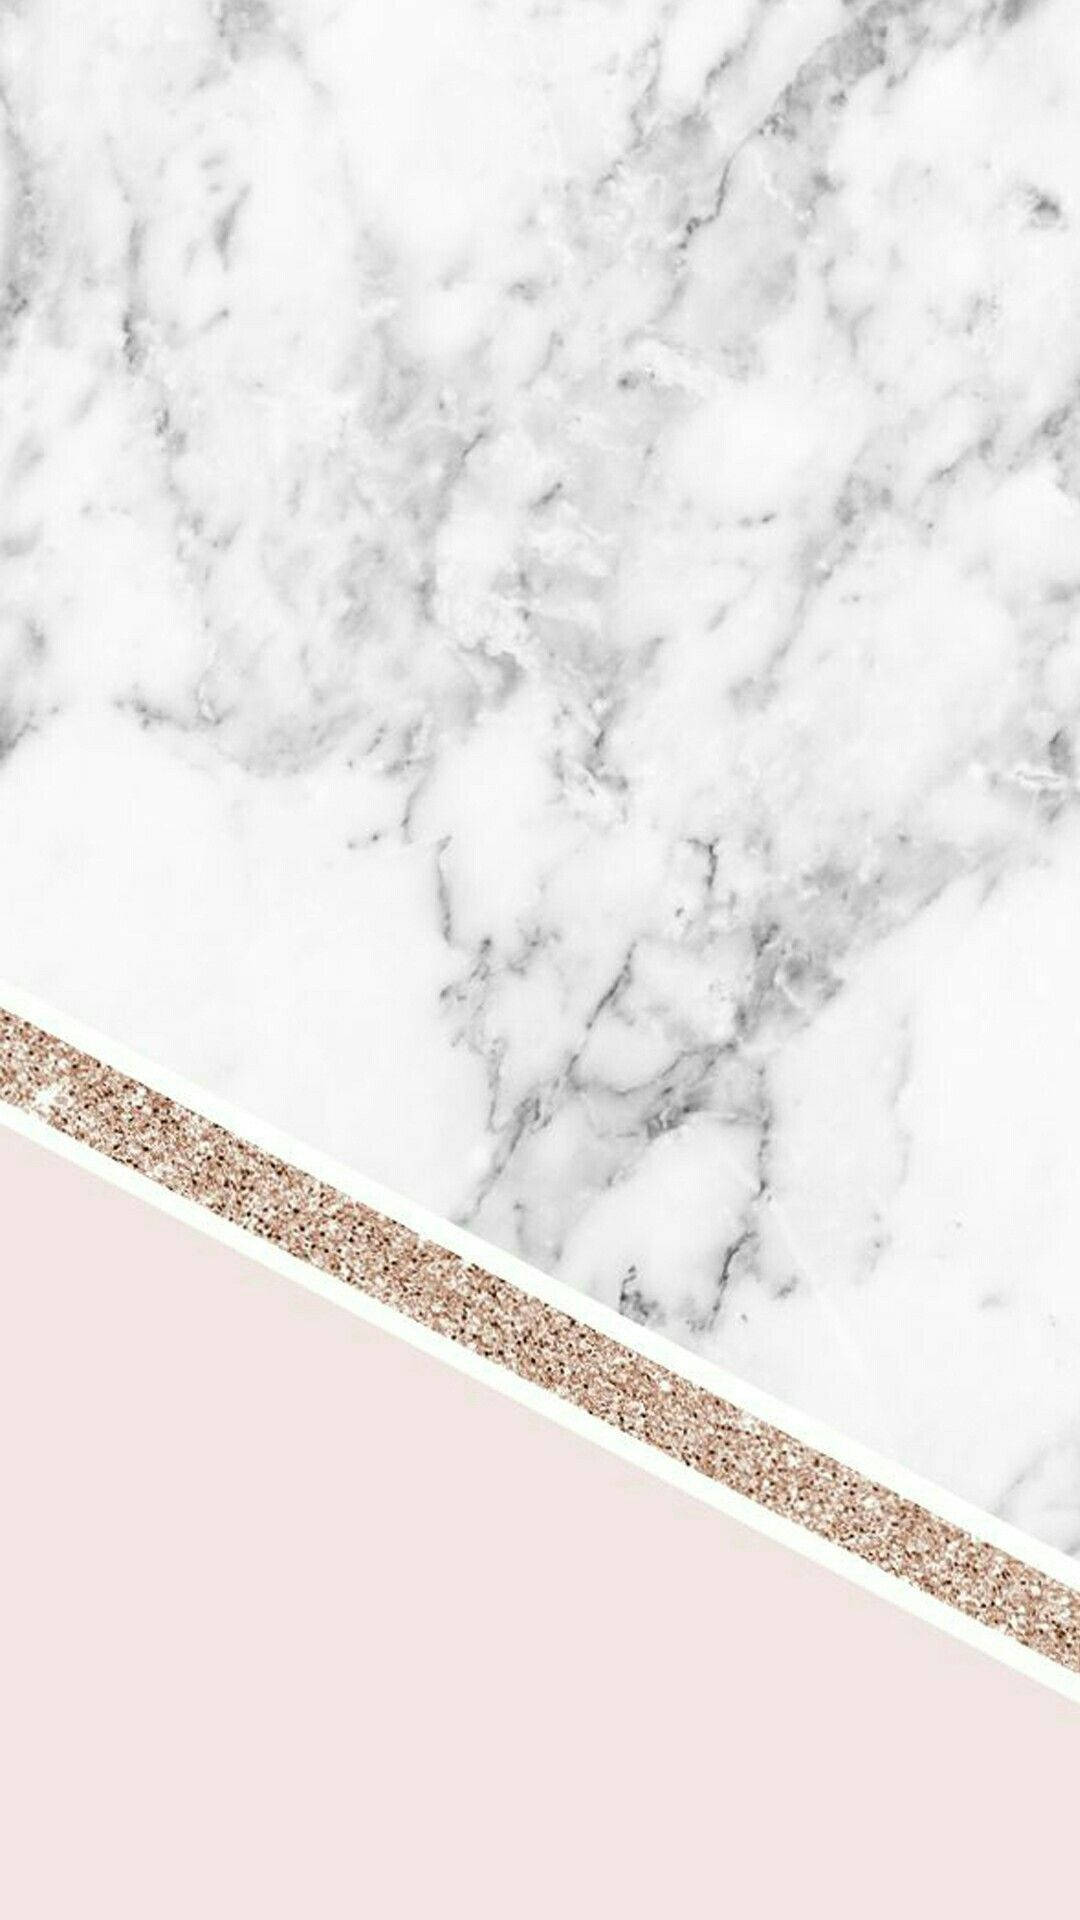 White With Glittery Rose Gold Marble Iphone Wallpaper